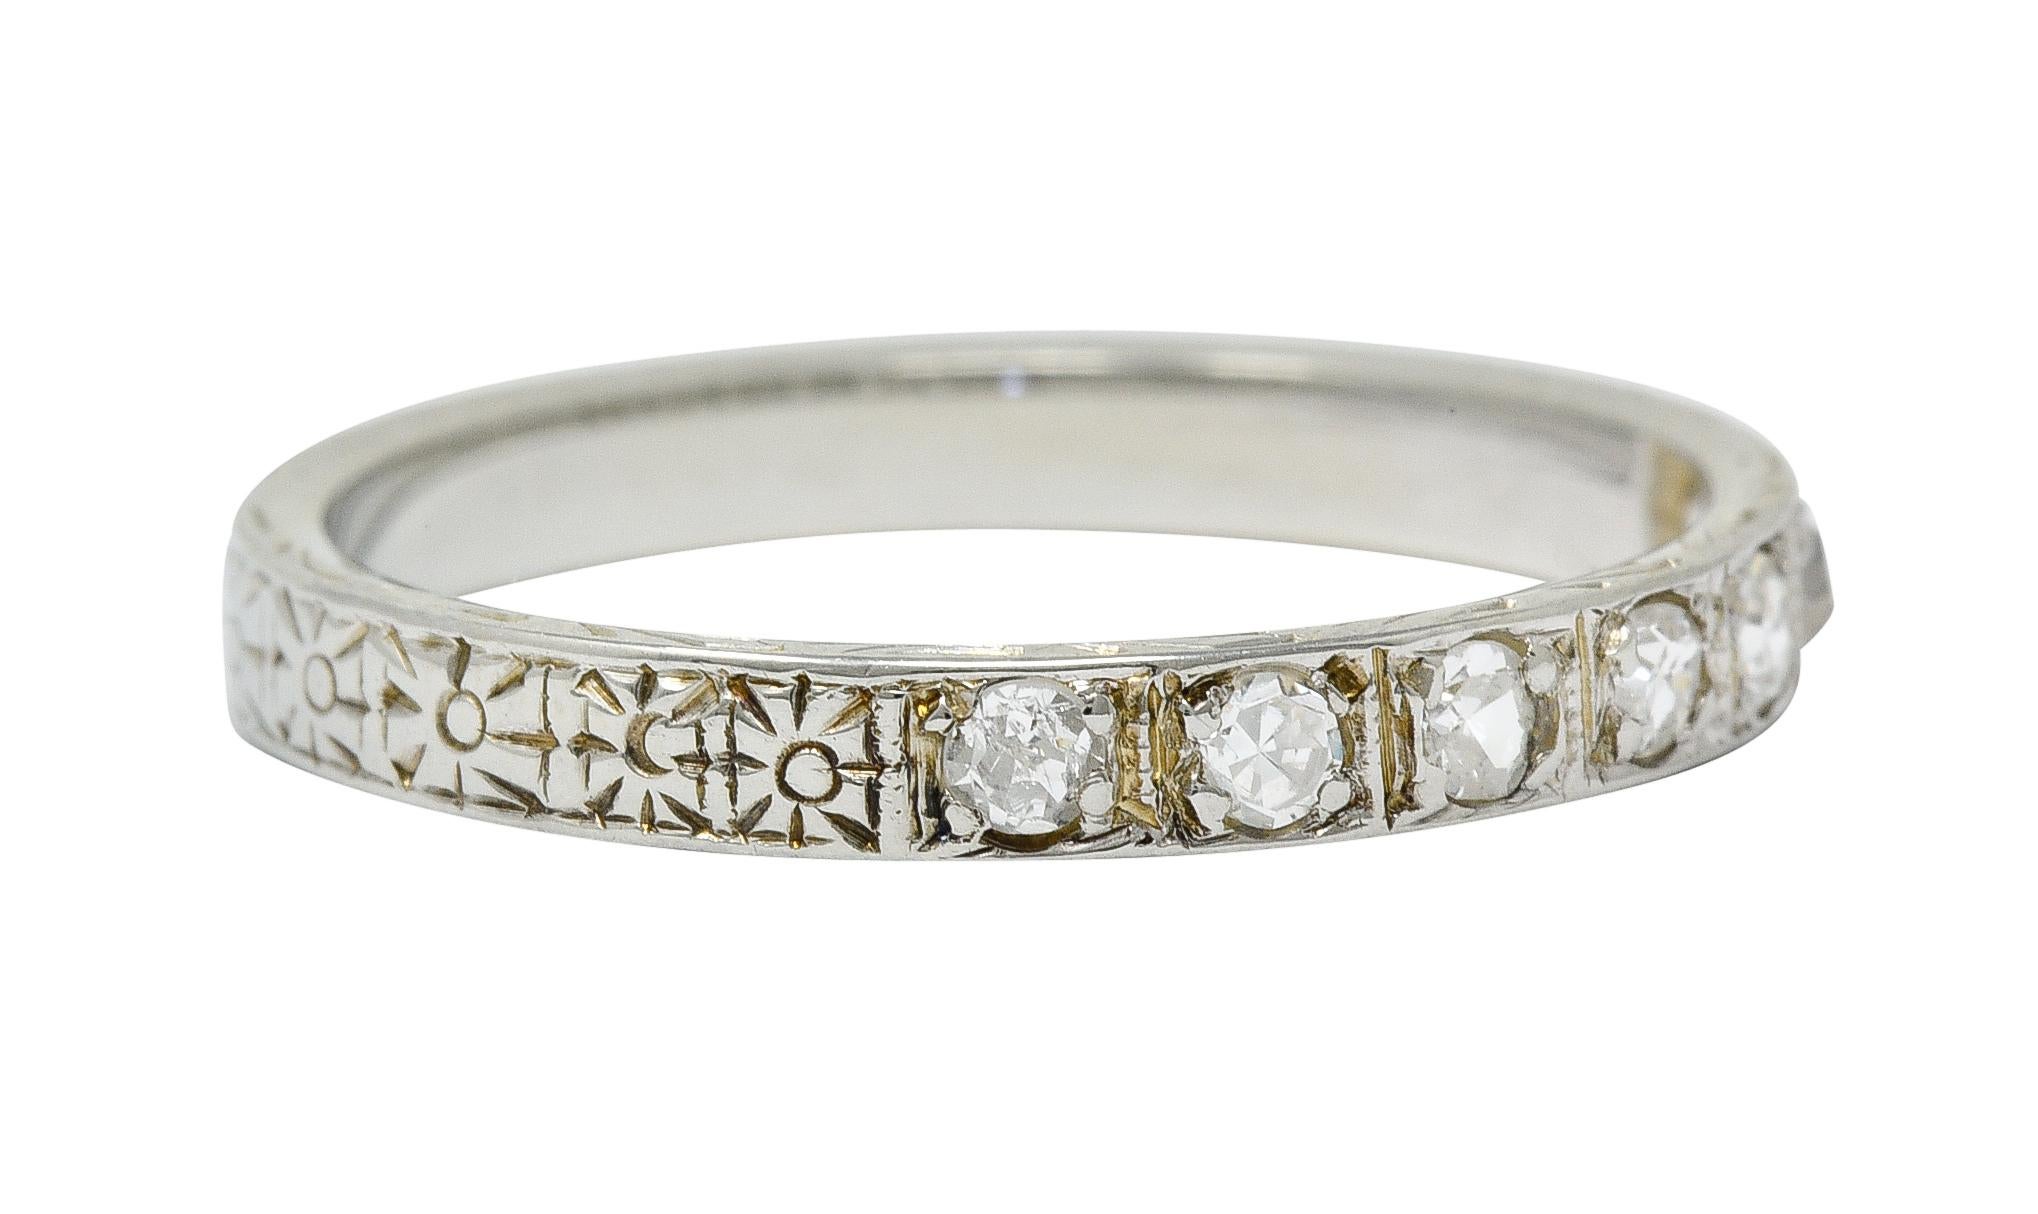 Band ring features seven old single cut diamonds

Weighing in total approximately 0.21 carat with H to J color and clarity consistent with age

Bead set in square forms and completes as an orange blossom shank; deeply engraved fully around

Stamped